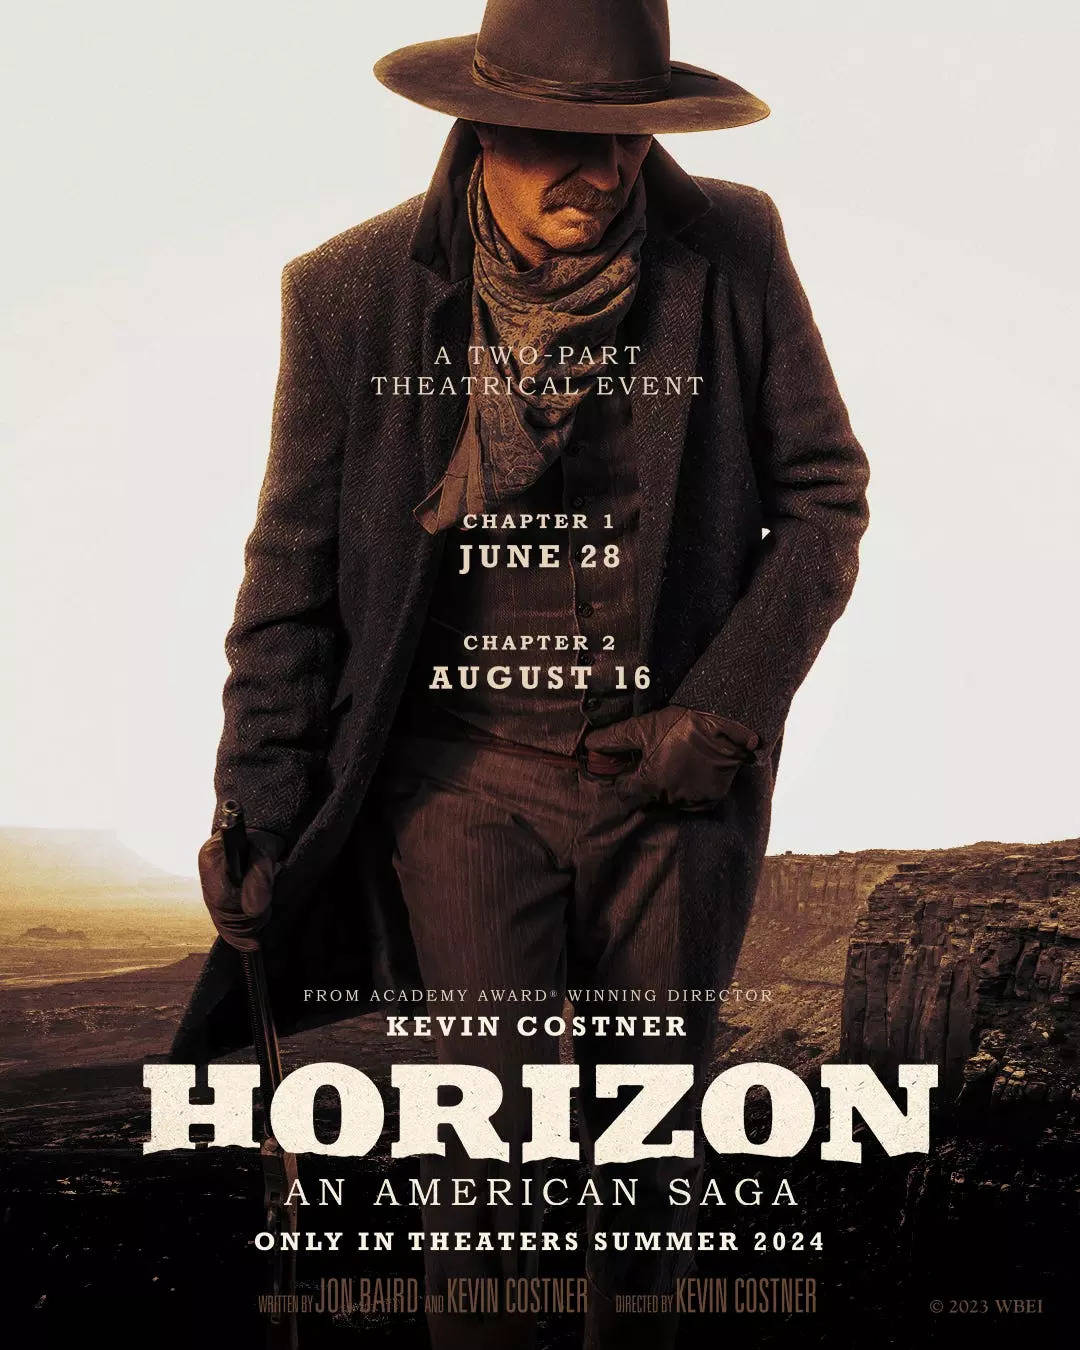 The poster for "Horizon: An American Saga," directed by and starring Kevin Costner.